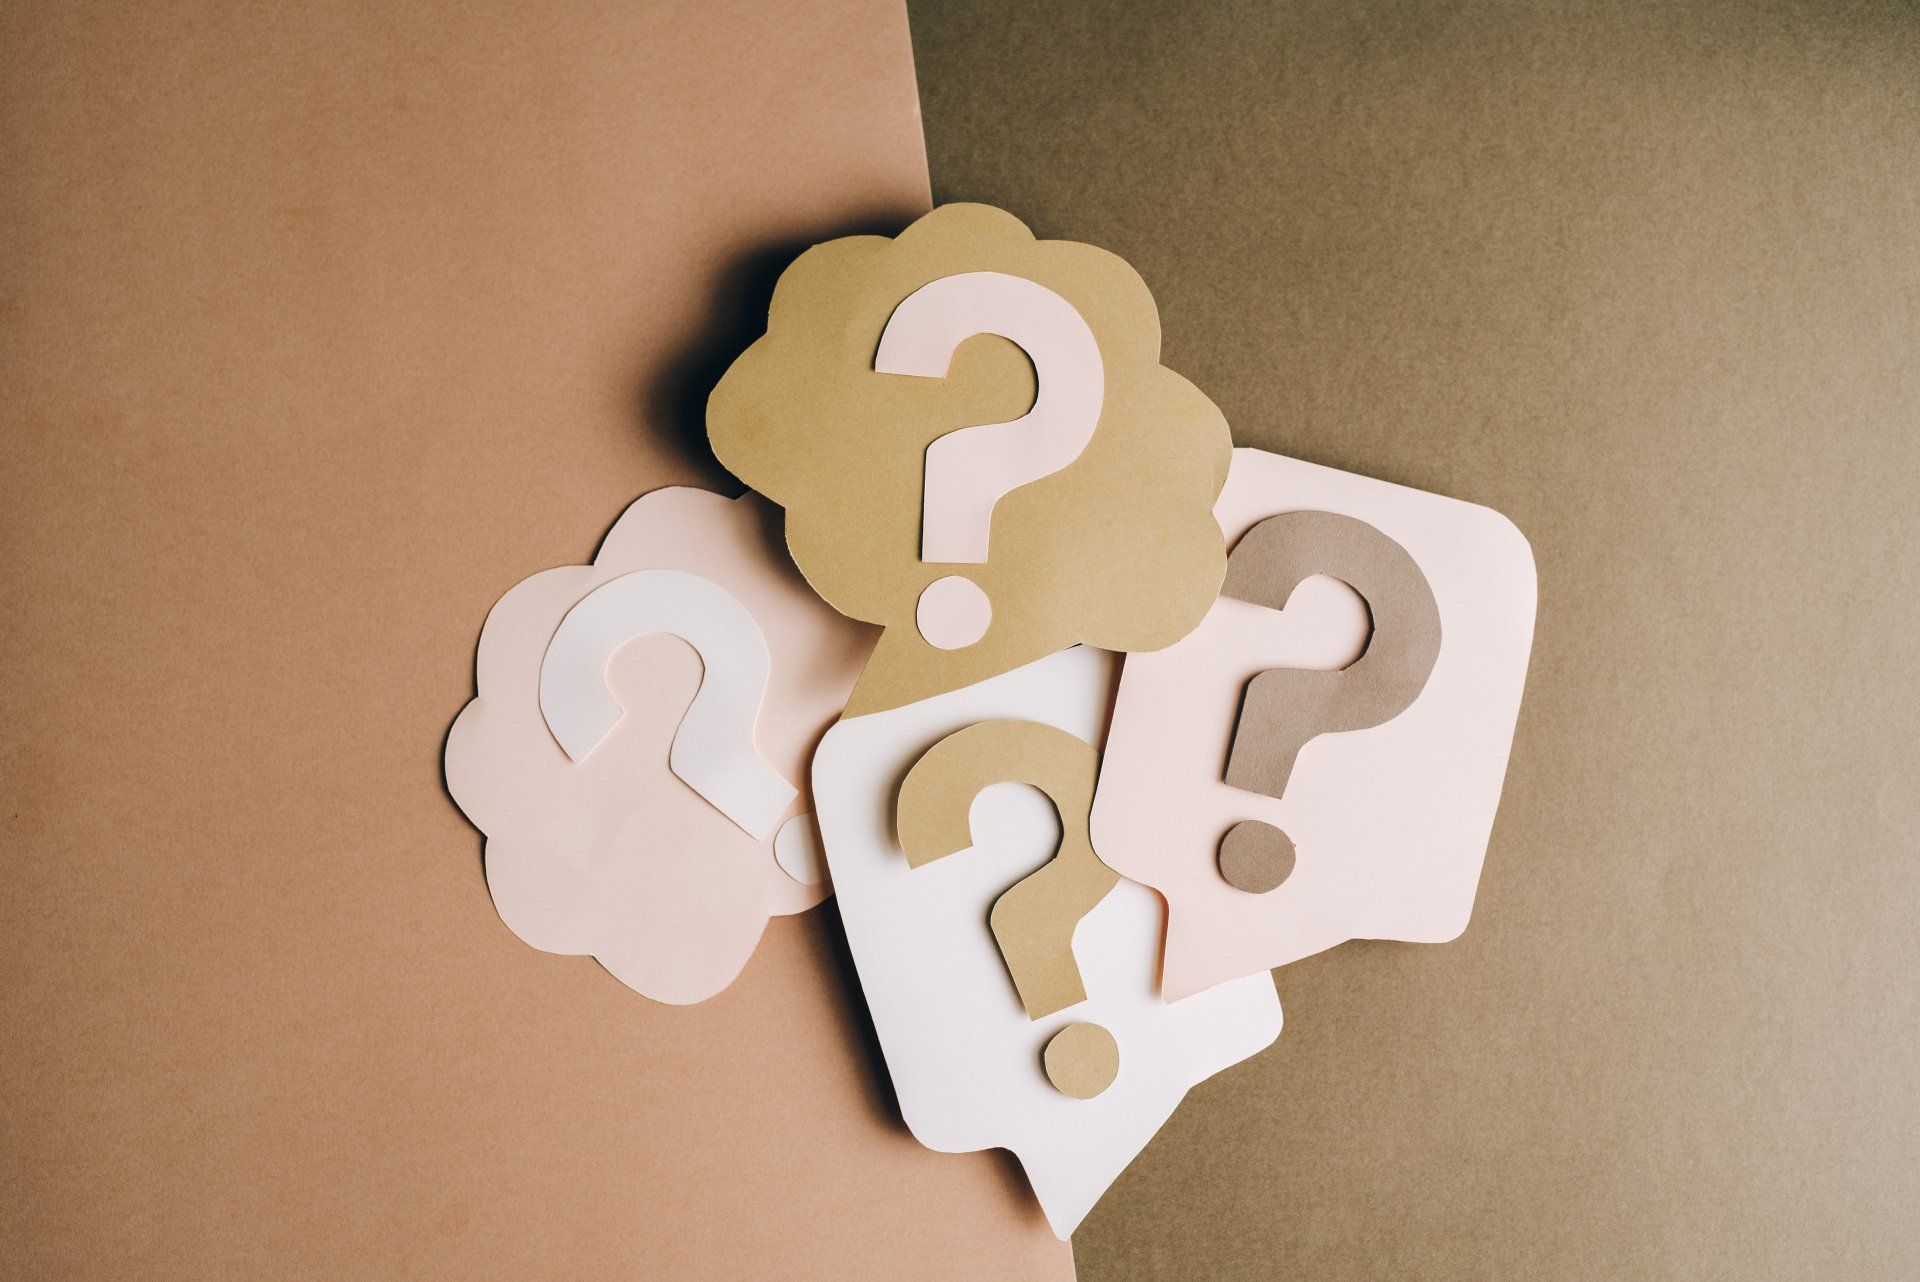 A group of paper speech bubbles with question marks on them.